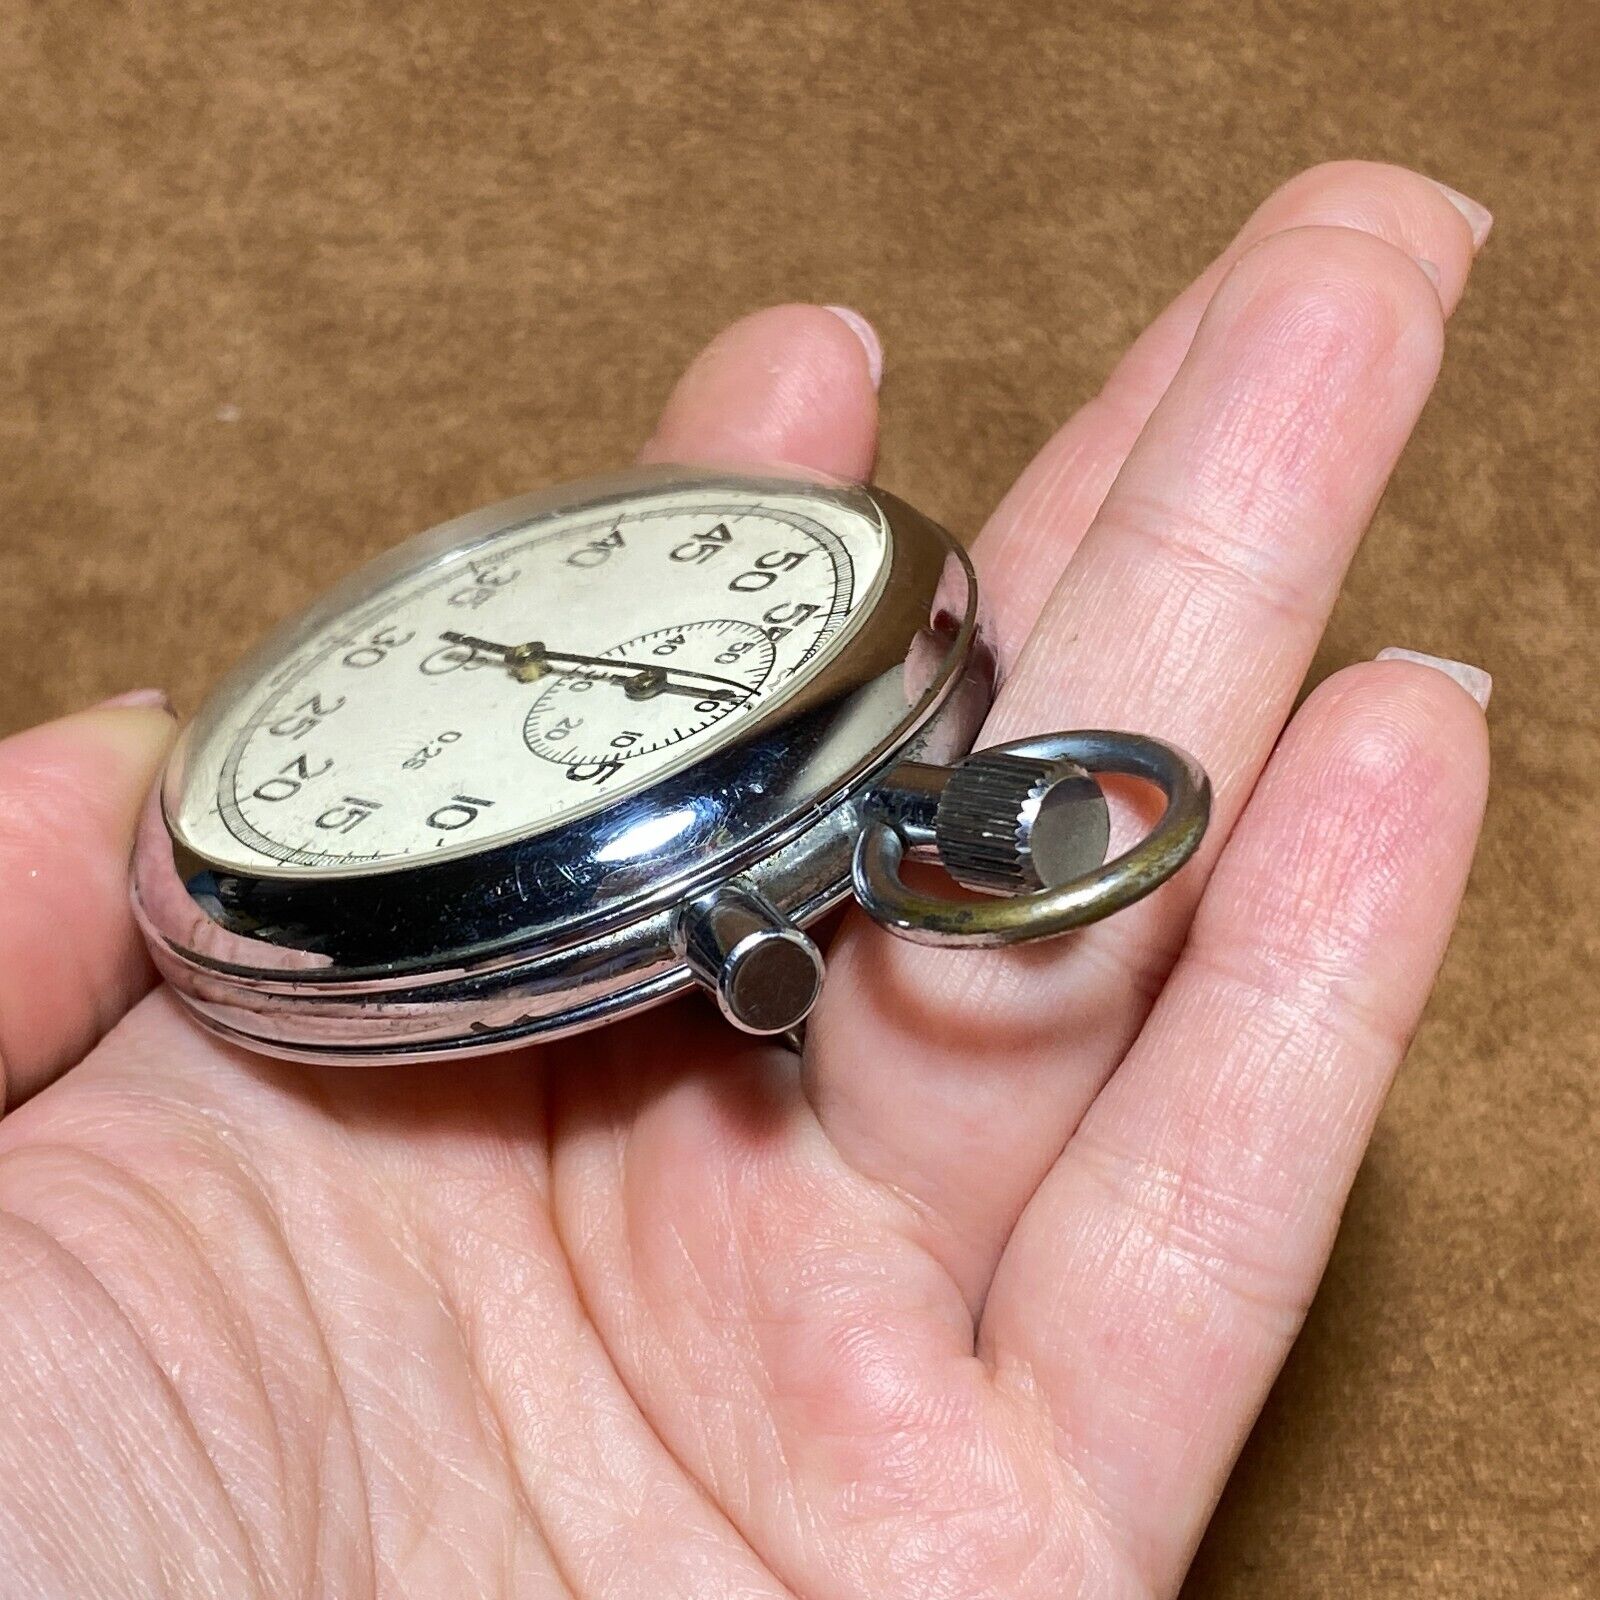 Soviet Stopwatch Two-Button Agat Zlatoust Mechanical Pocket Watch Made in USSR